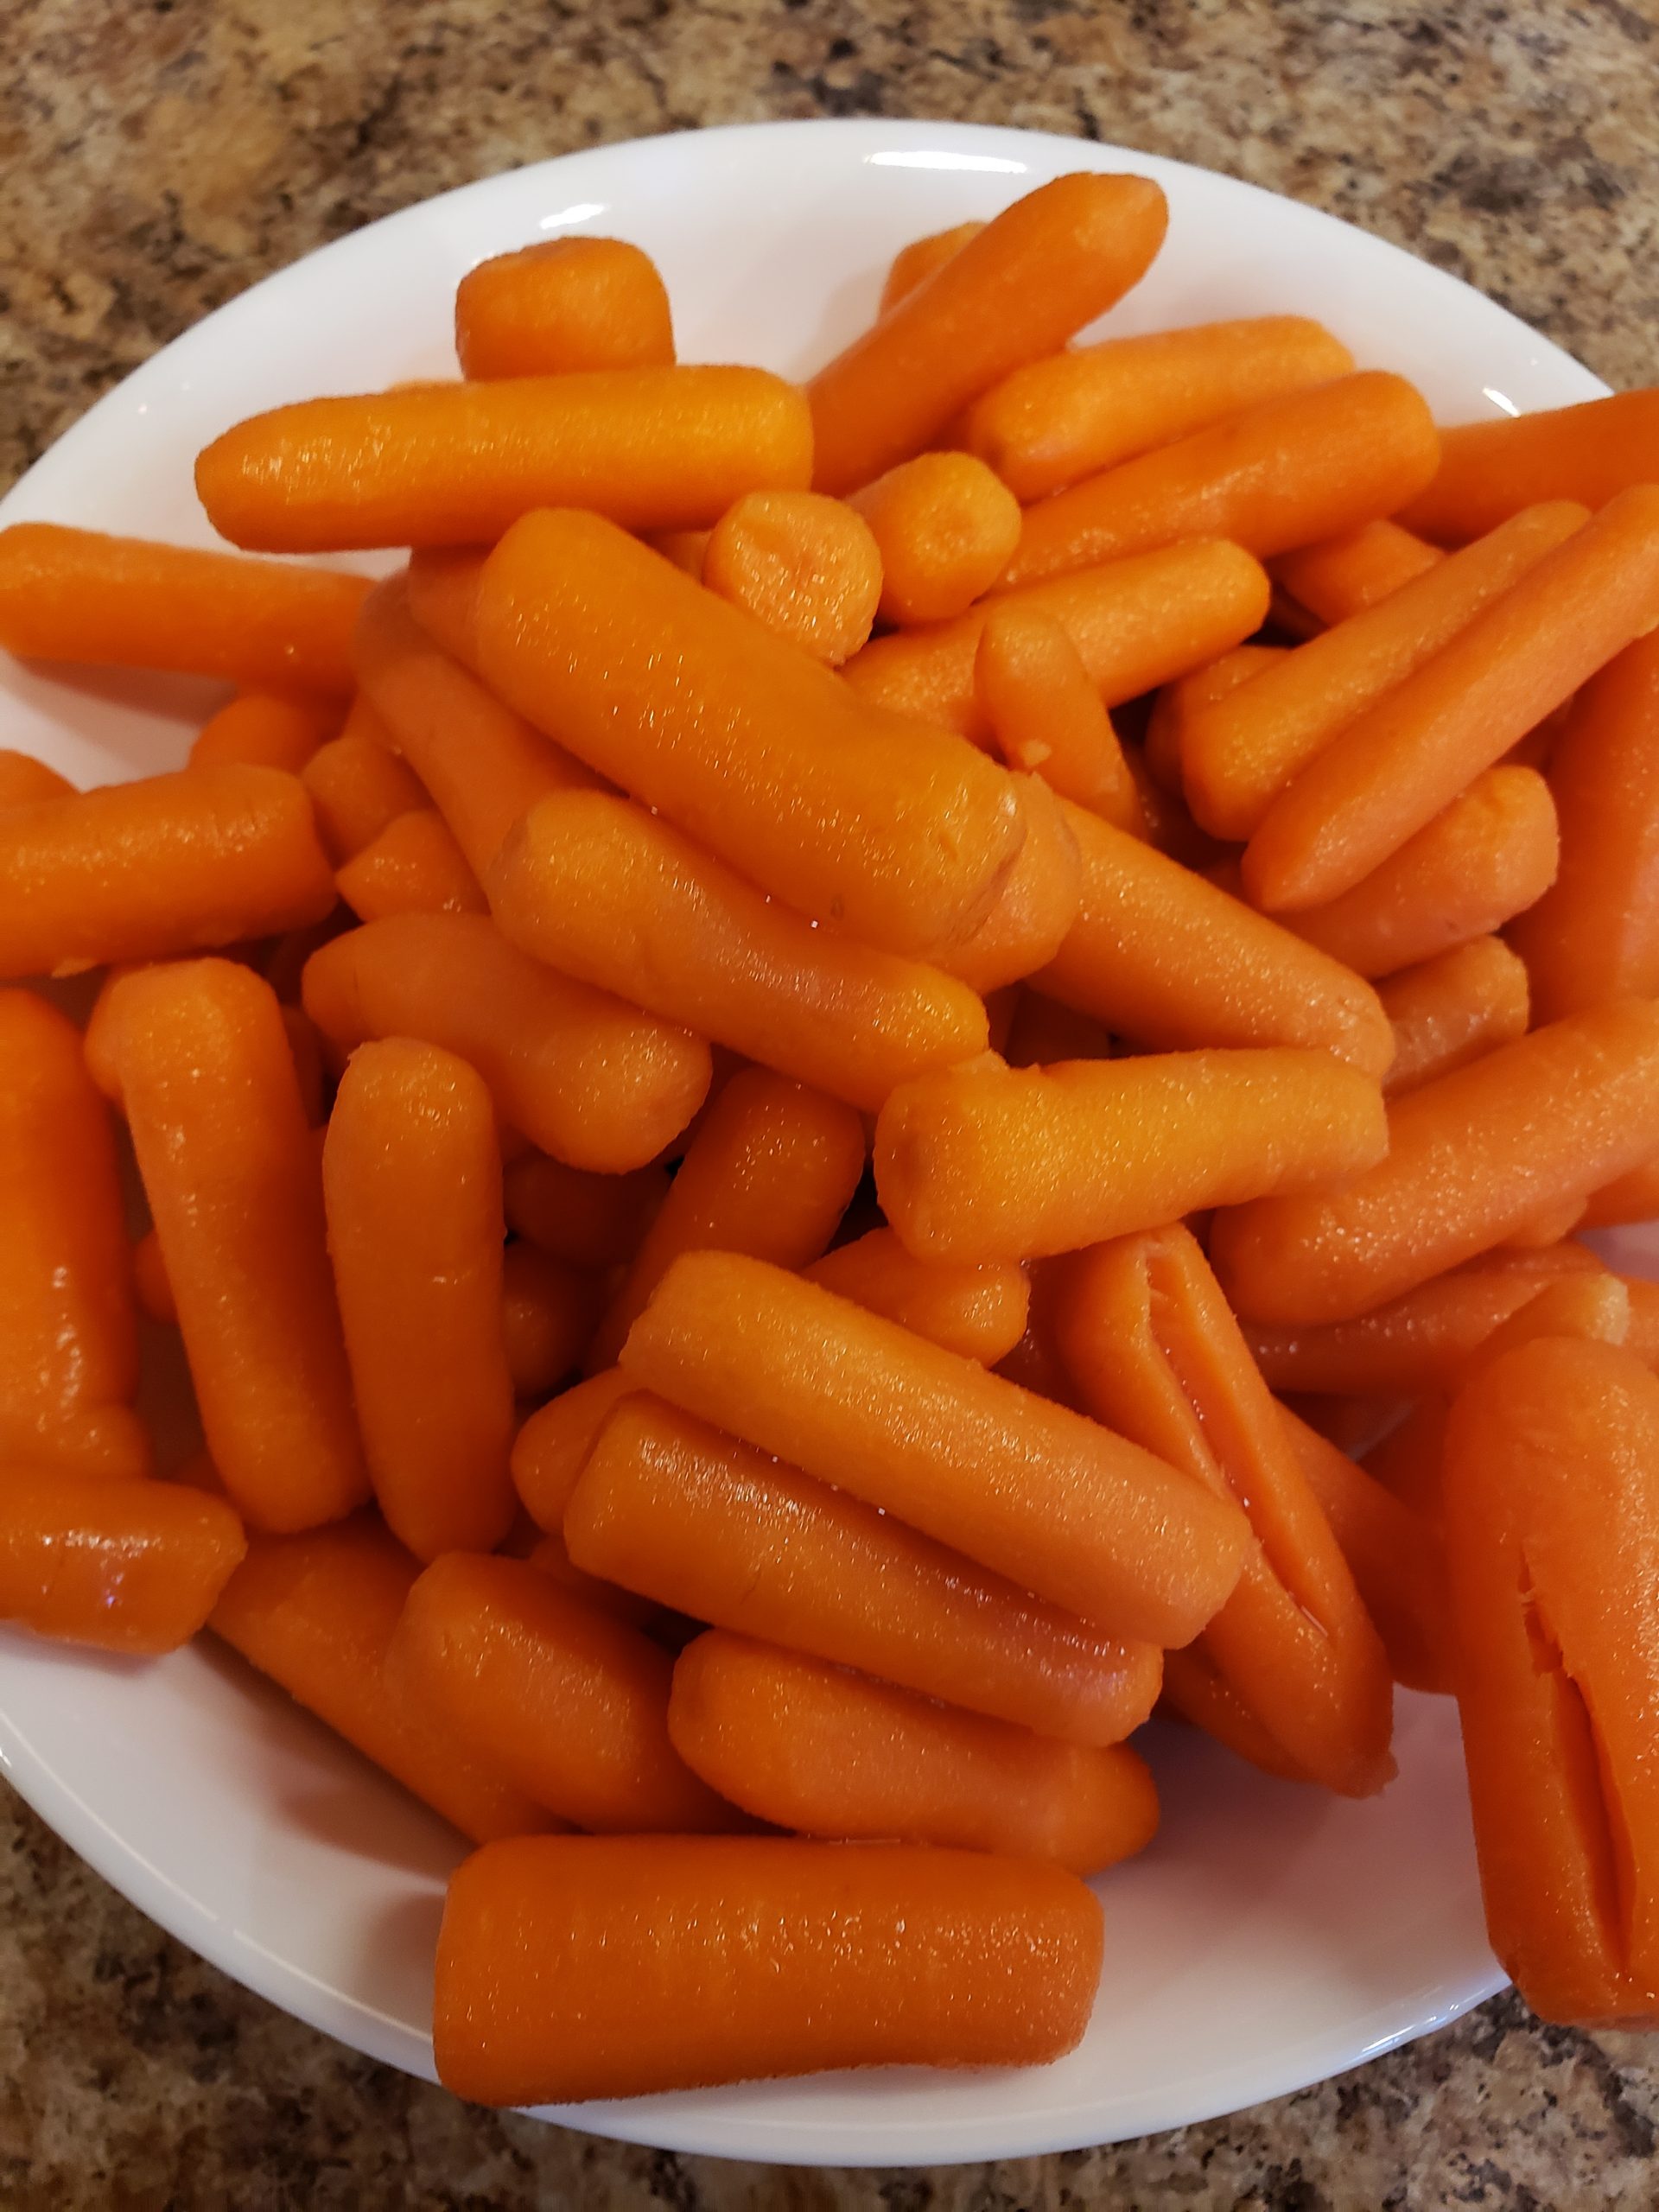 Carrots are a great snack!Carrots are rich in vitamins, minerals, and fiber. They are also a good source of antioxidants. Antioxidants are nutrients present in plant-based foods. They help the body remove free radicals, unstable molecules that can cause cell damage if too many accumulate in the body. 